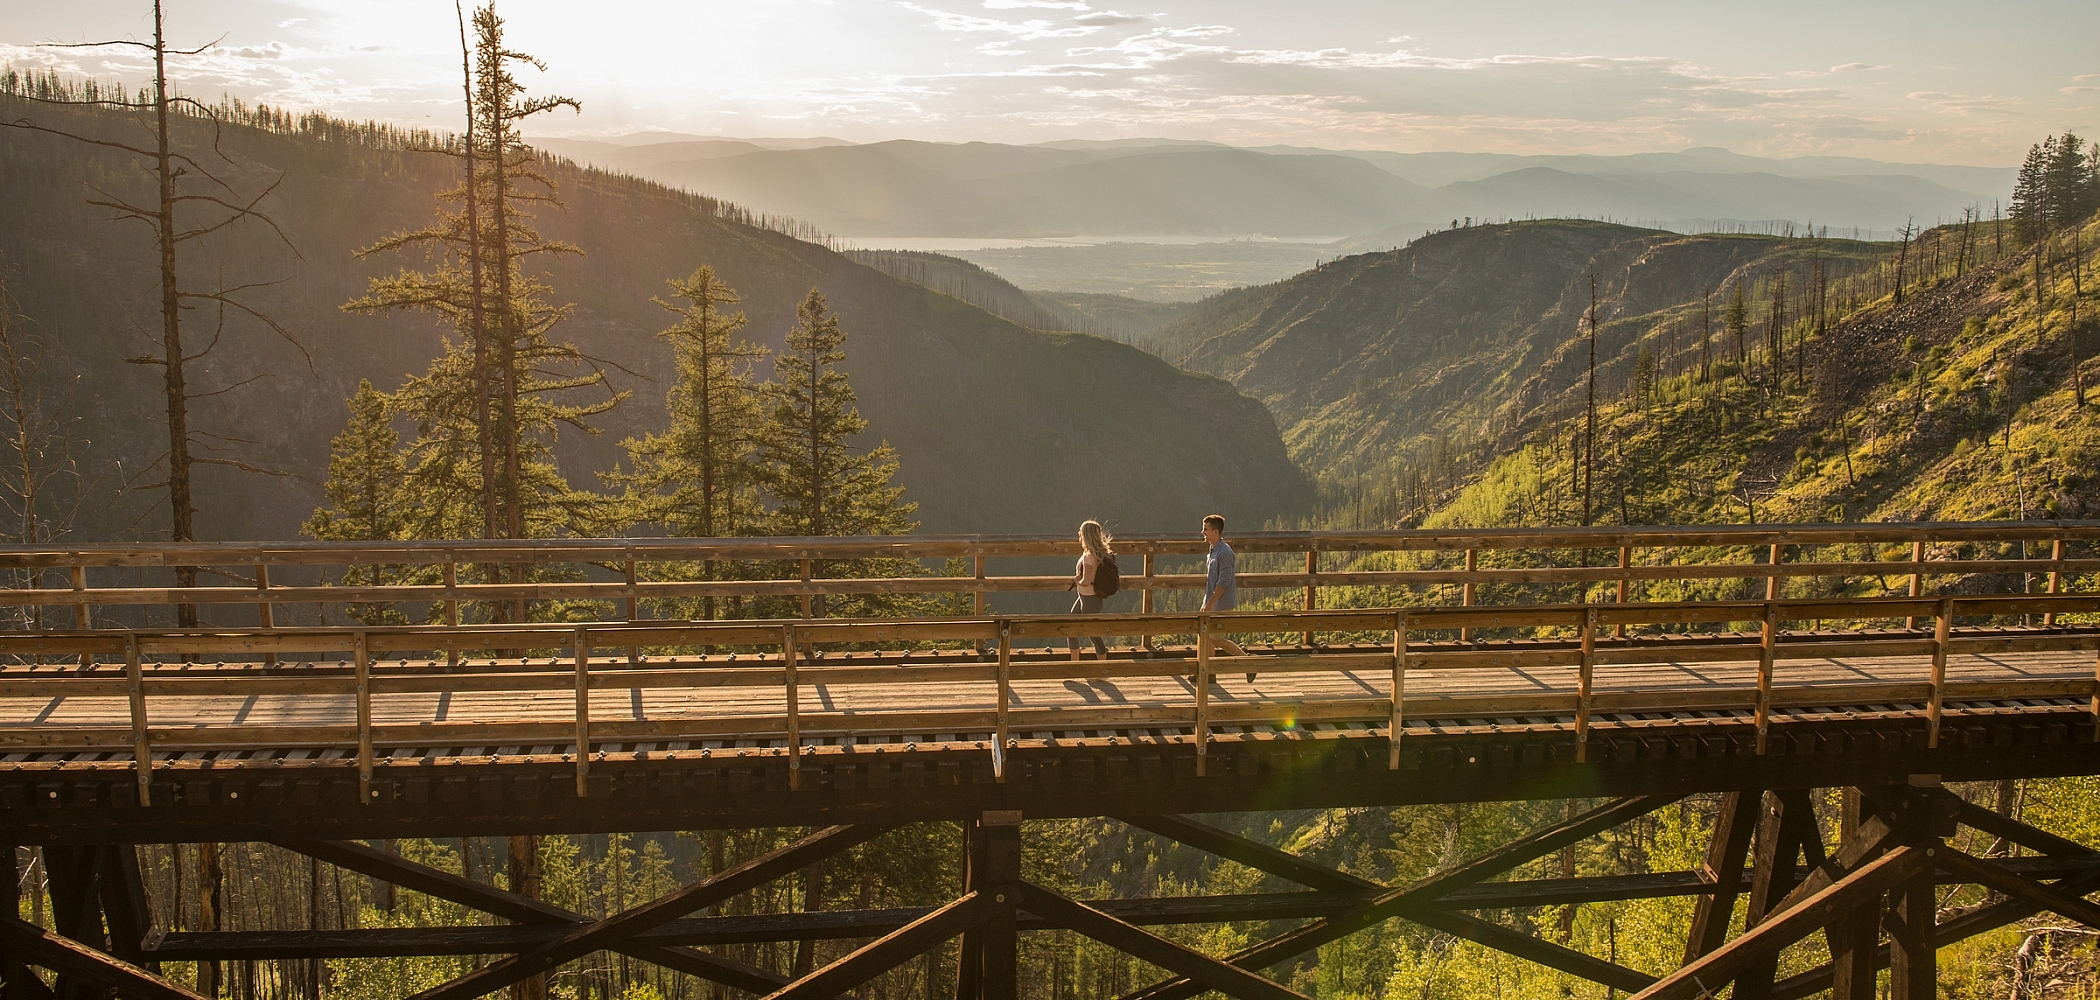 Two people walk across a tall wooden trestle bridge with forested mountains in the background.